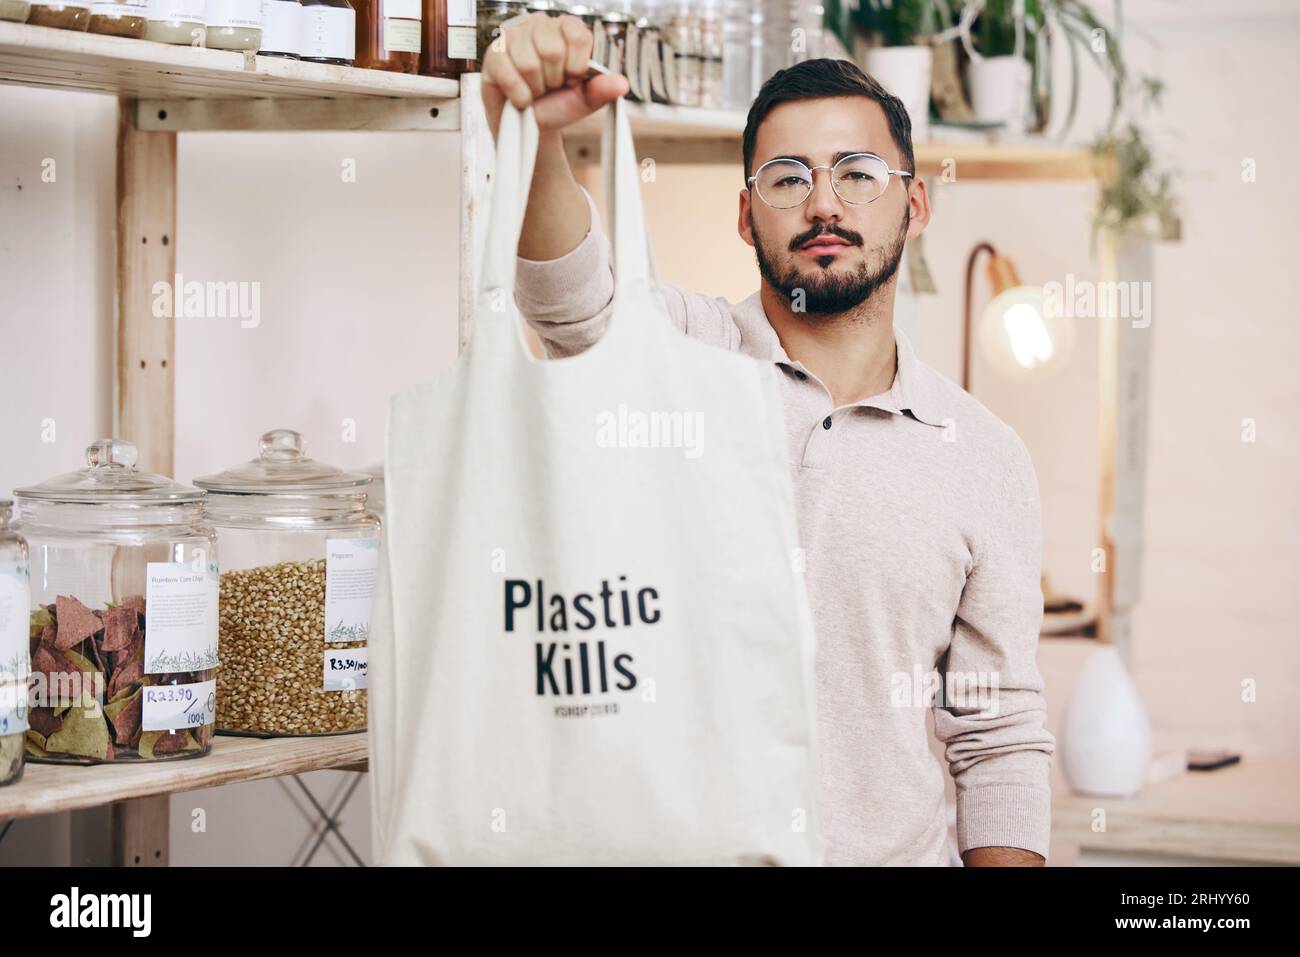 Man at eco friendly grocery store, fabric shopping bag and commitment to climate change at sustainable small business. Zero waste, plastic kills logo Stock Photo